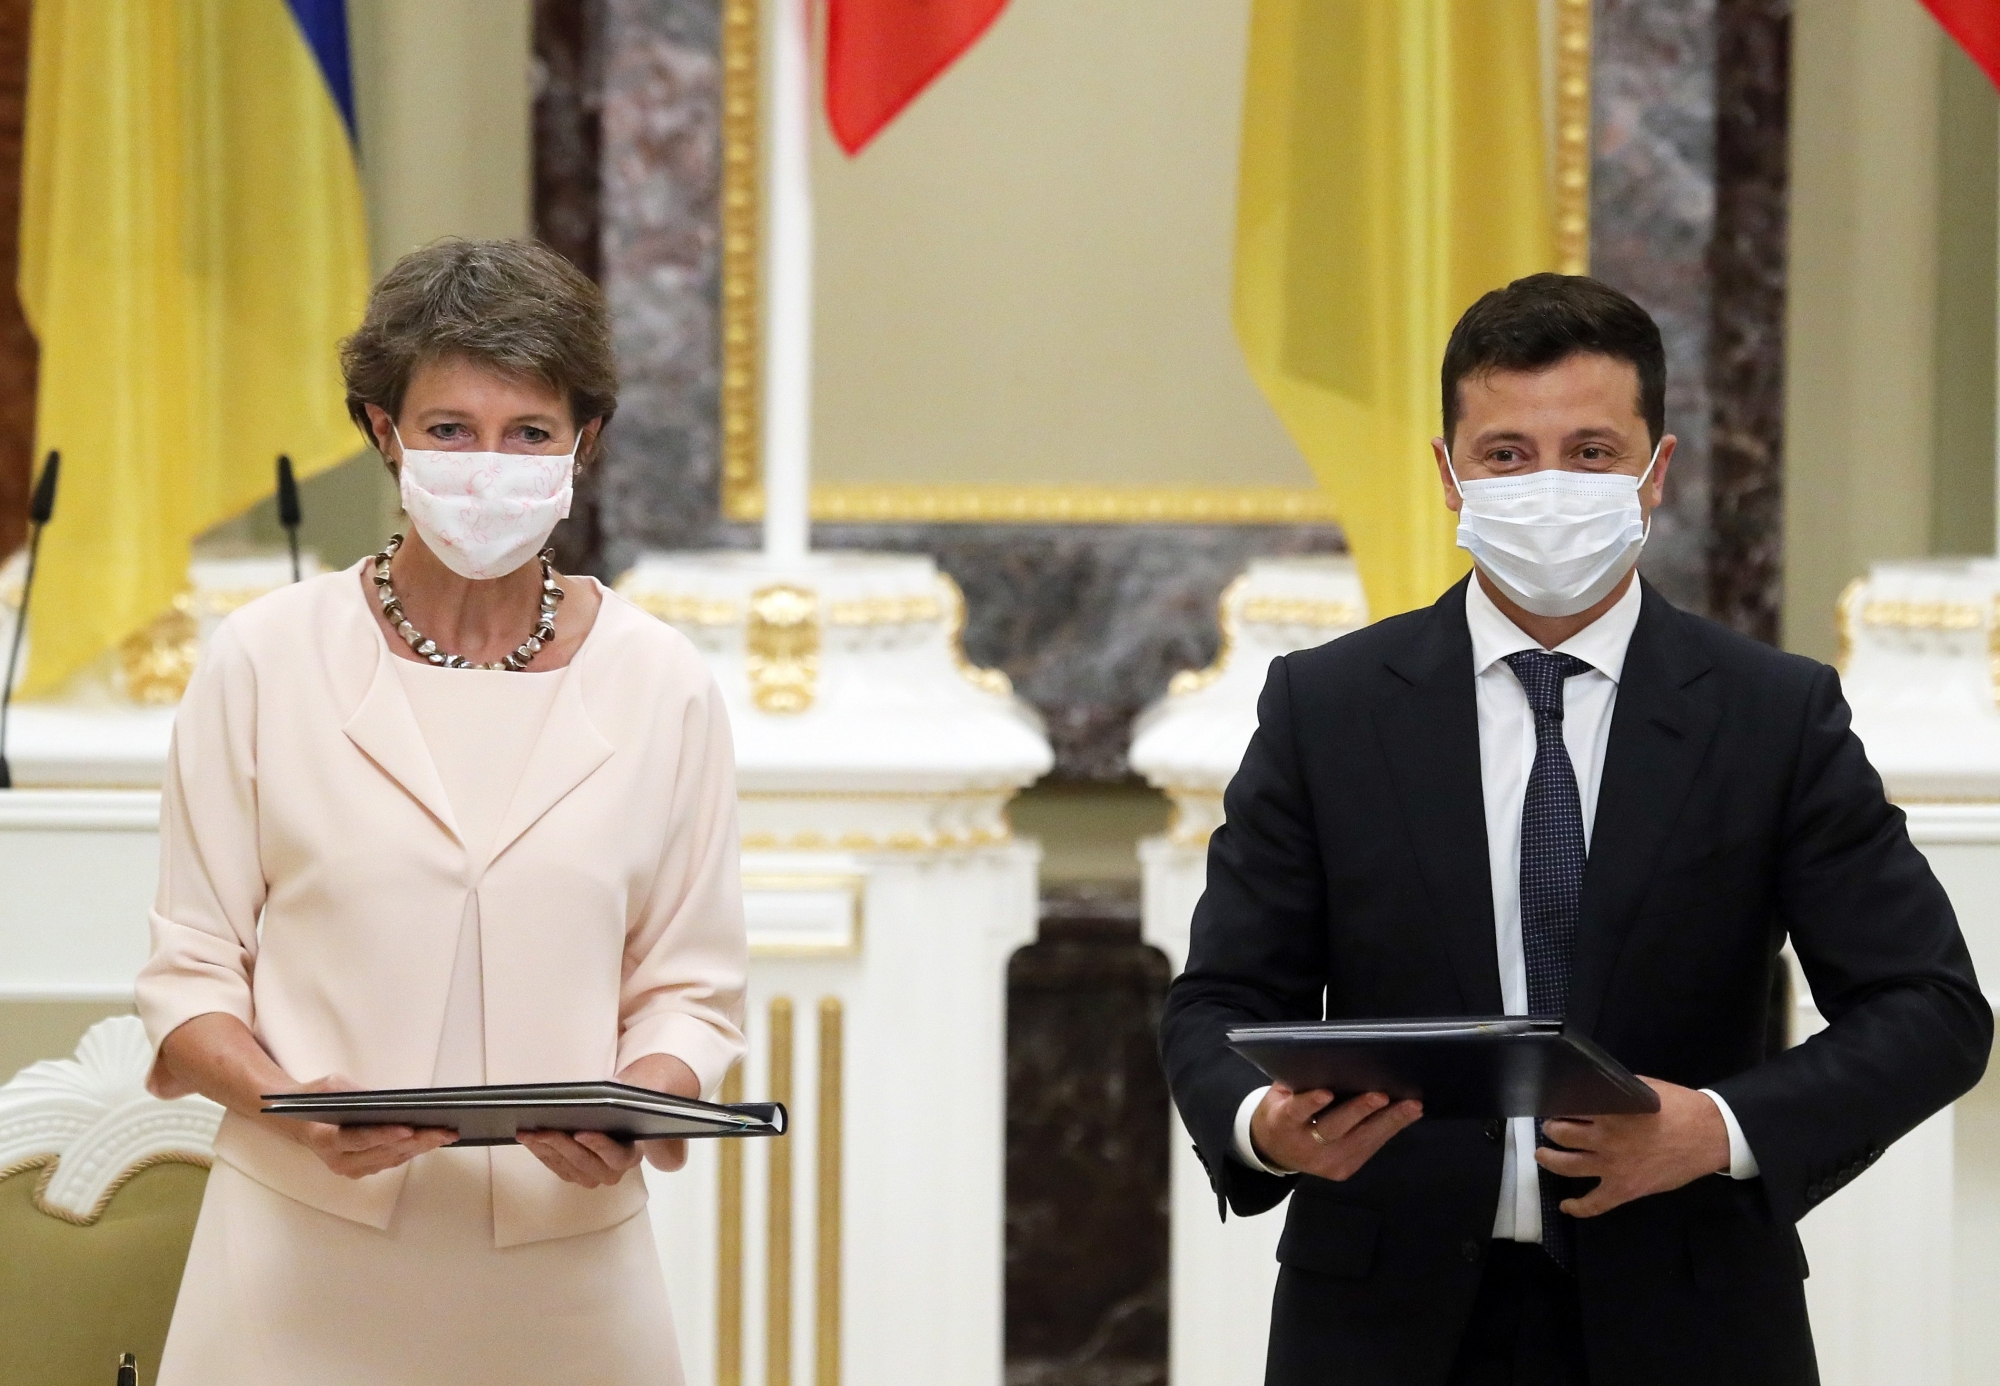 epa08558310 Ukrainian President Volodymyr Zelensky (R) and and Swiss president Simonetta Sommaruga (L) attend a signing documents ceremony at the Mariinskiy Palace in Kiev, Ukraine, 21 July 2020. Simonetta Sommaruga is on state visit to Kiev to meet with top Ukrainian officials.  EPA/SERGEY DOLZHENKO ArcInfo